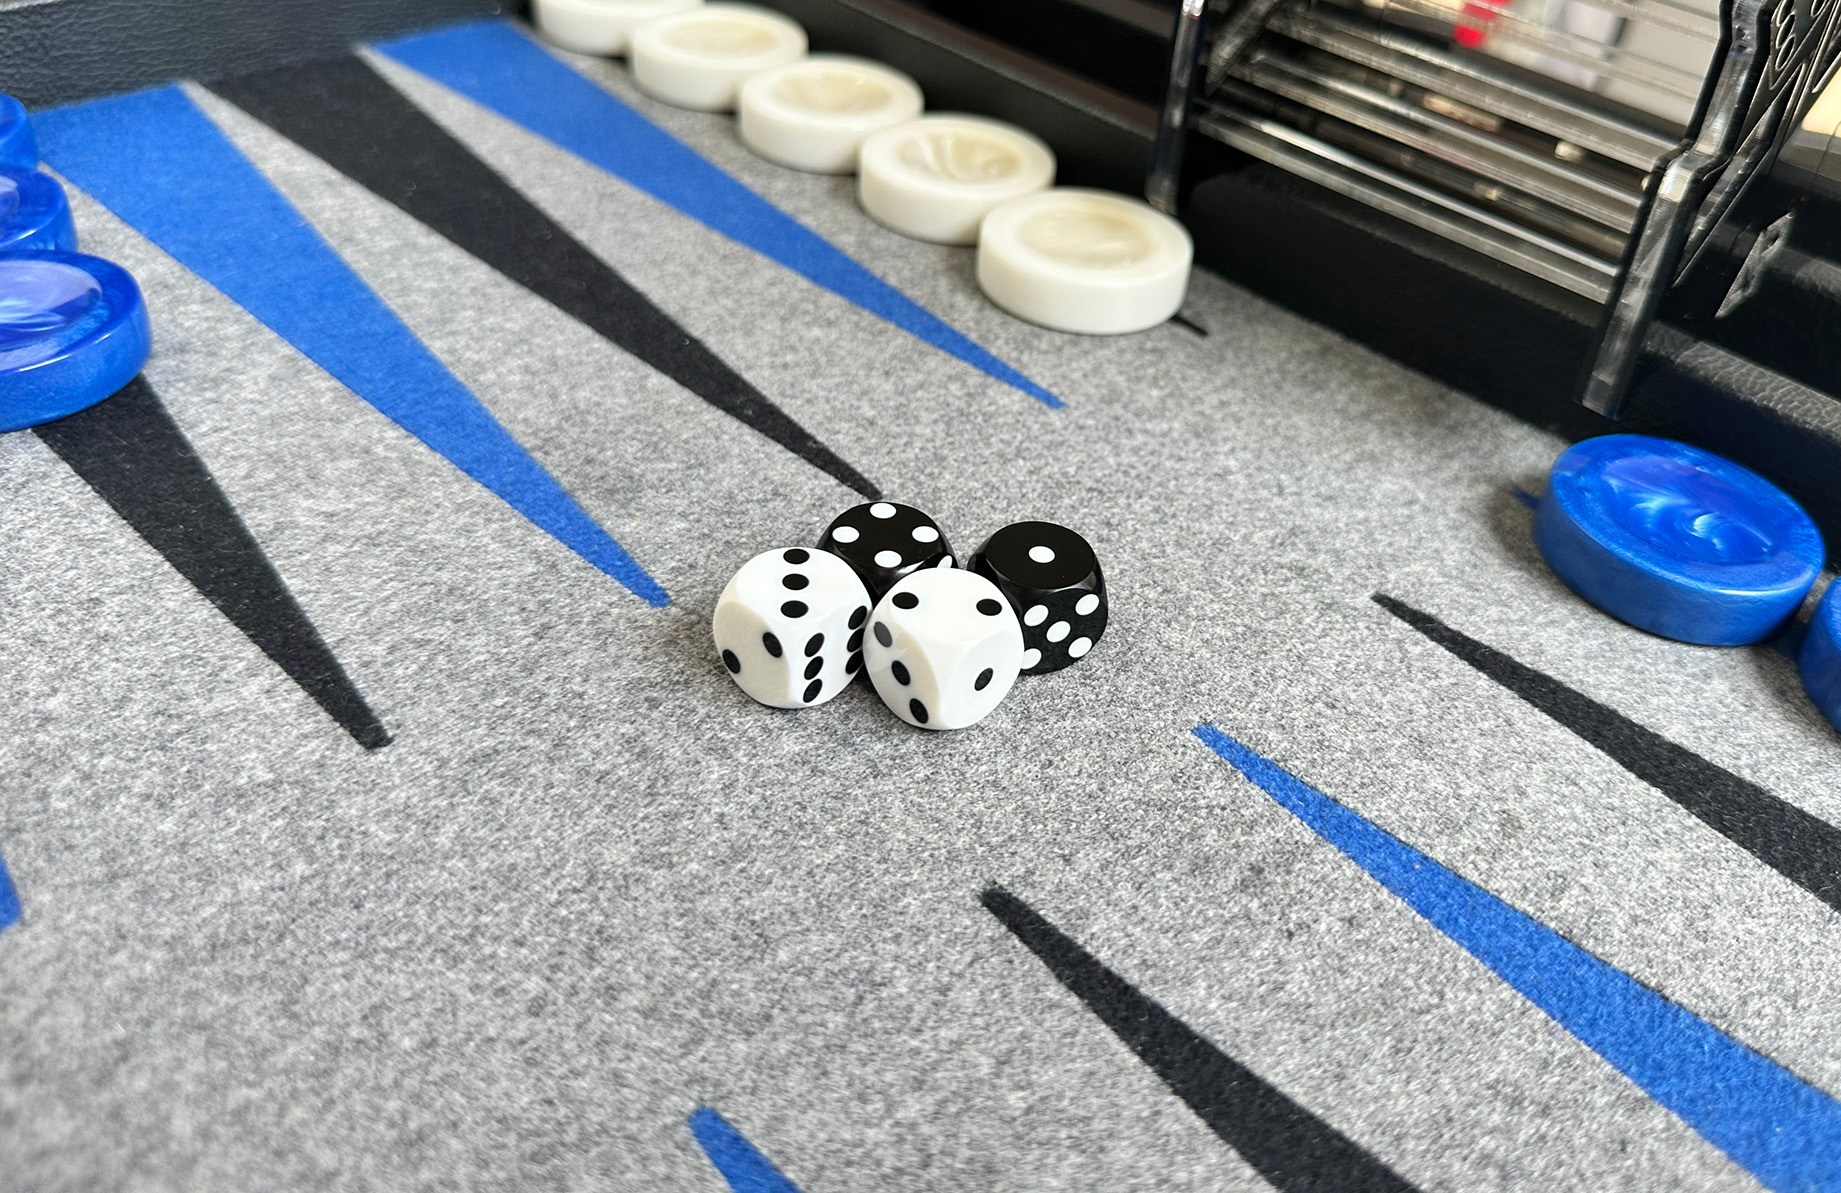 Backgammon Precision Dice – 16mm, 5/8 Inch, White and Black Opaque, 2 Pair